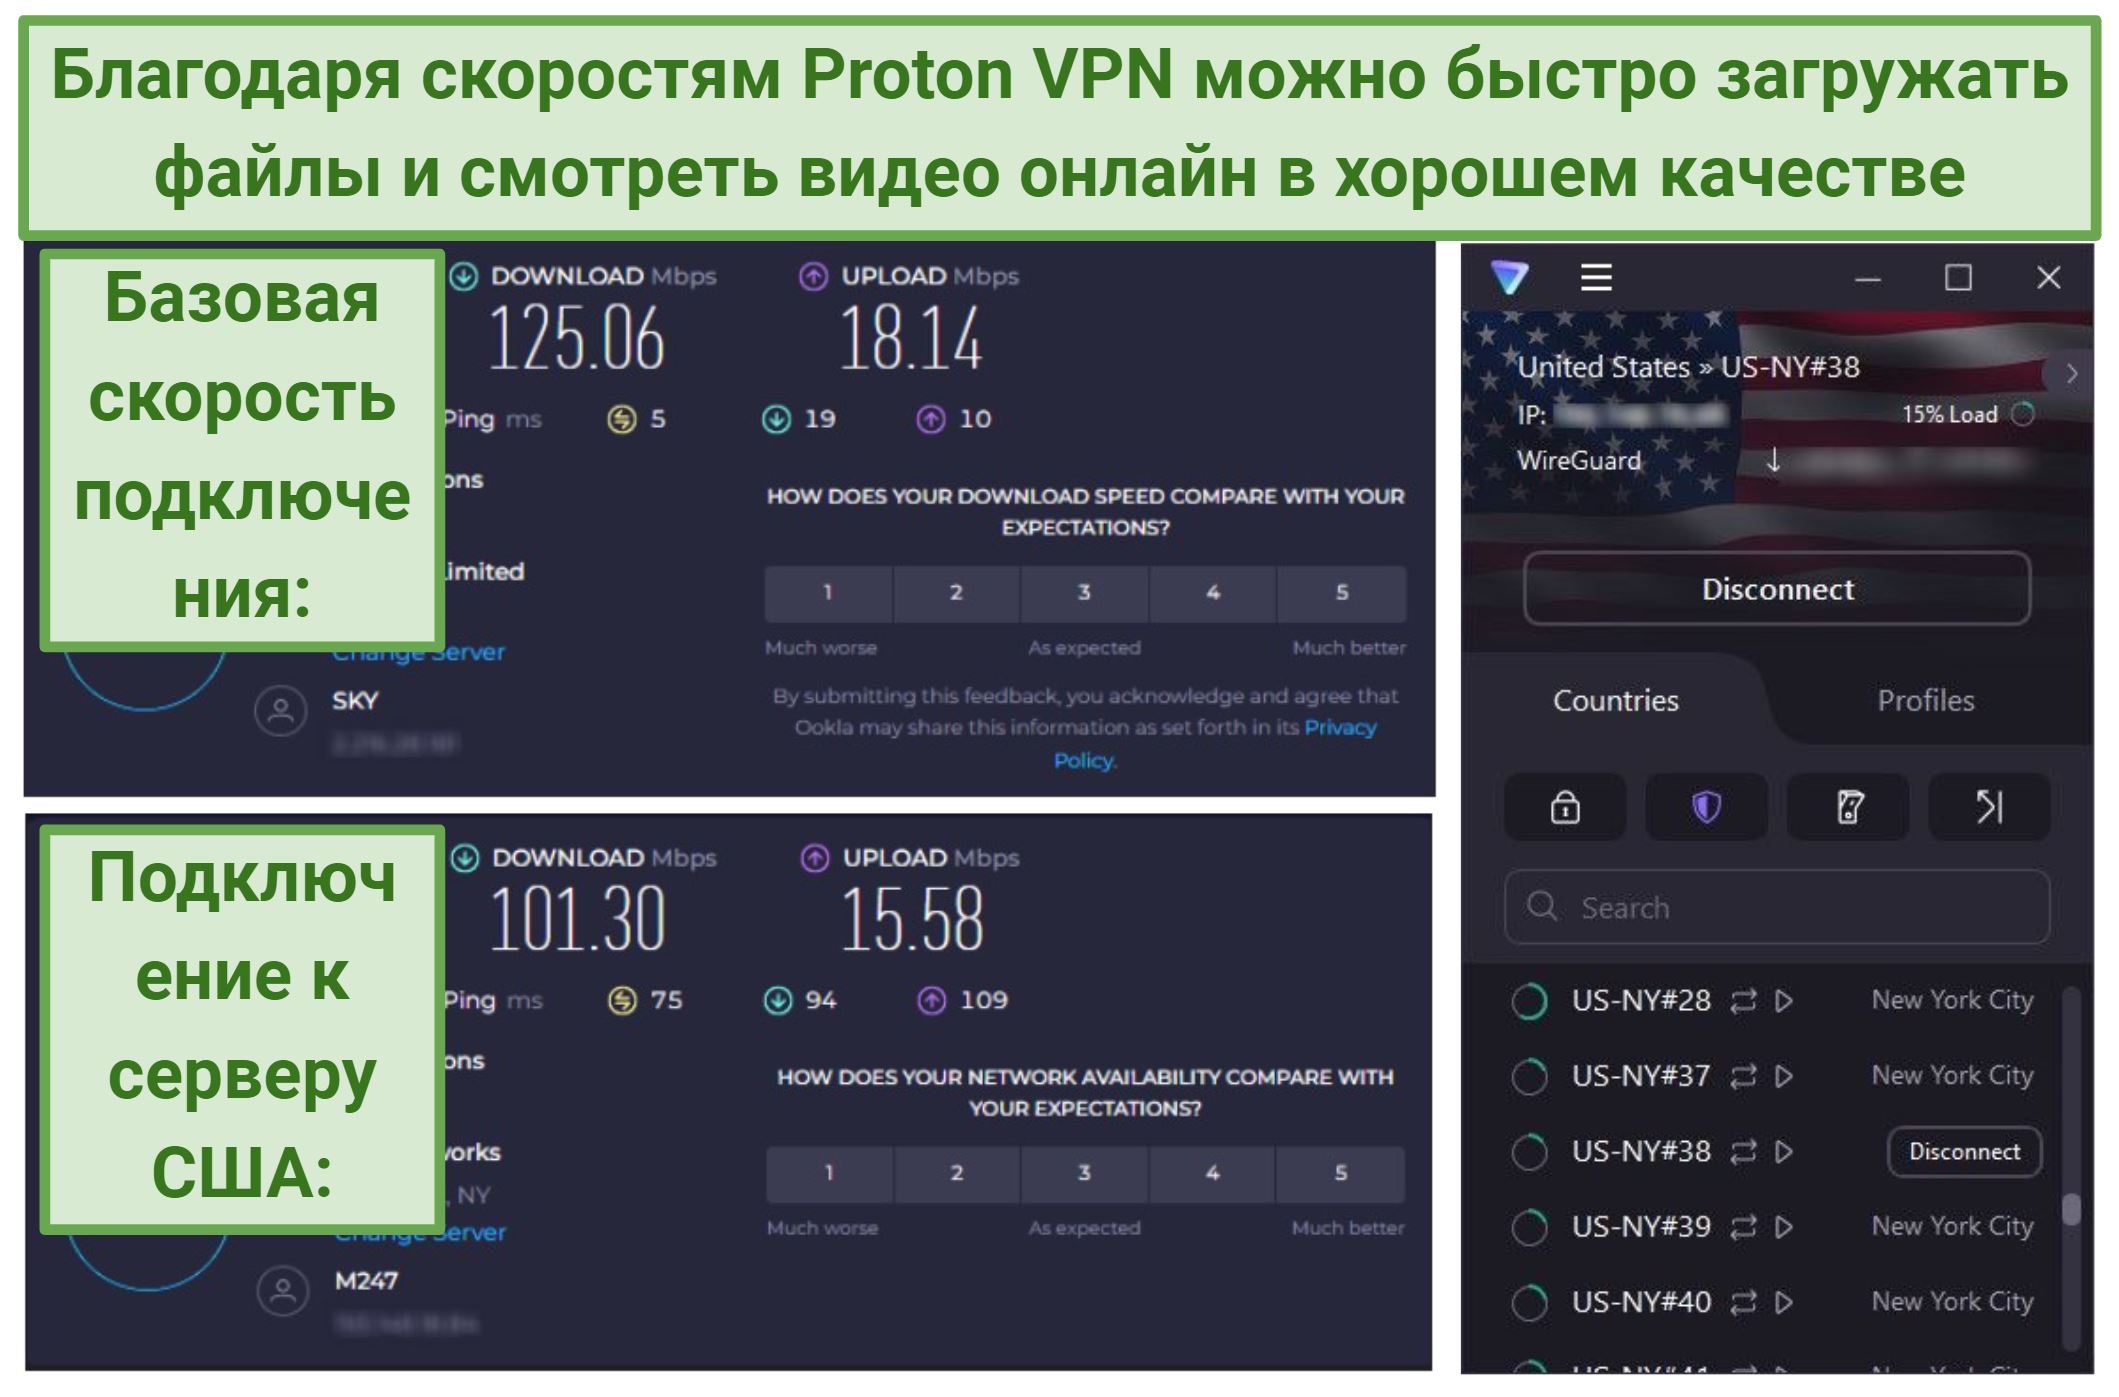 A screenshot of Proton VPN speed test results